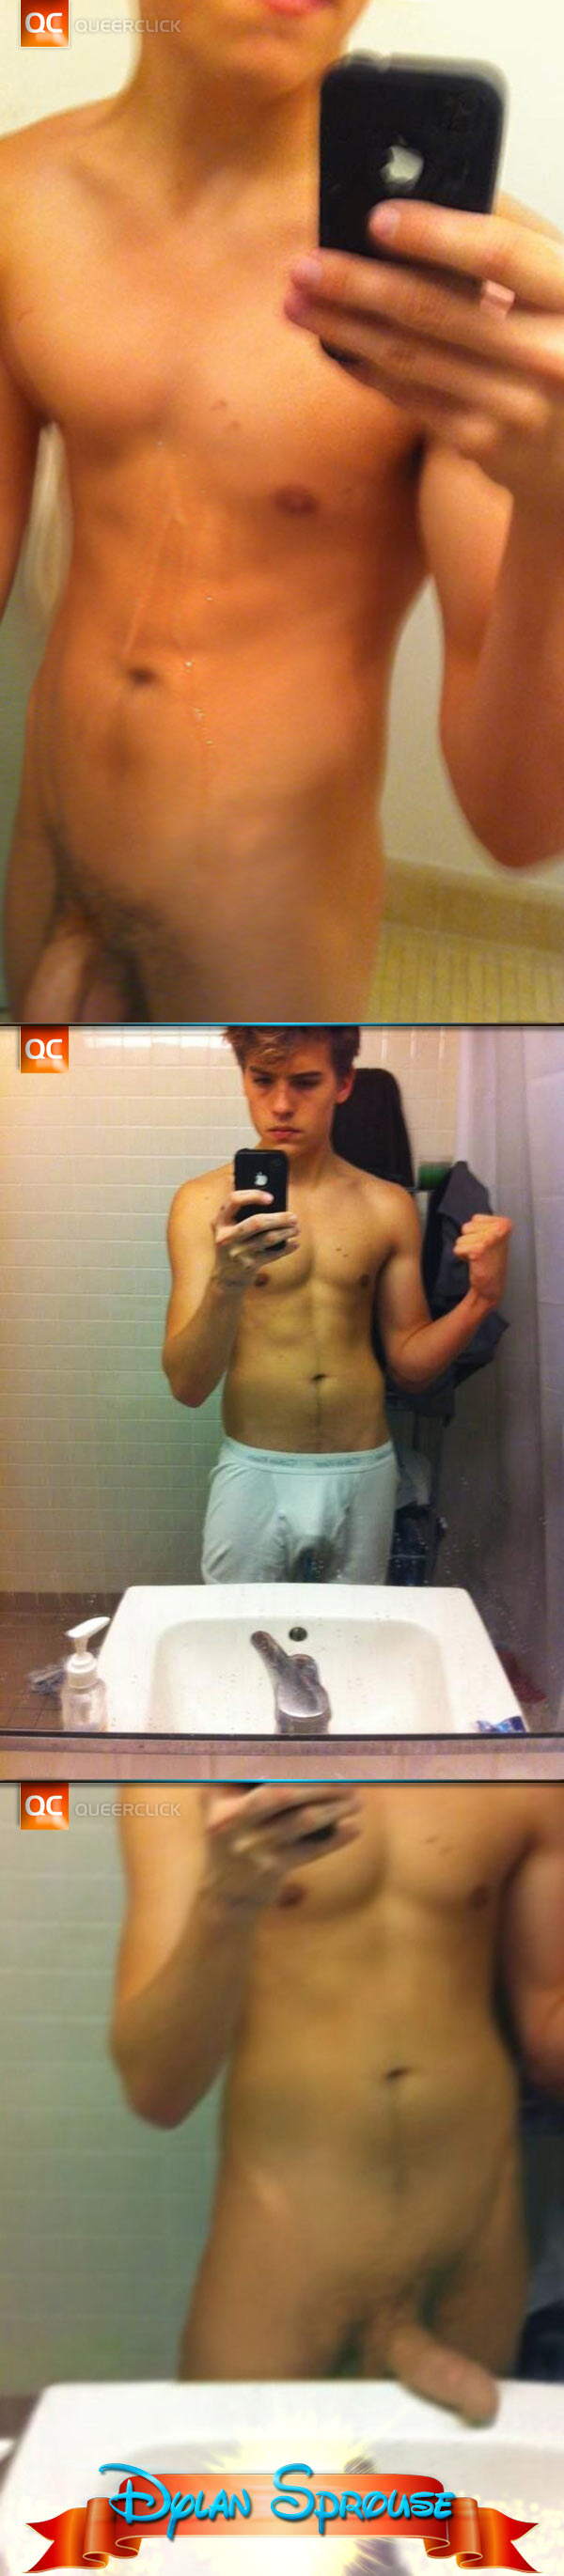 Dylan Sprouse Nude Photos Leak! 